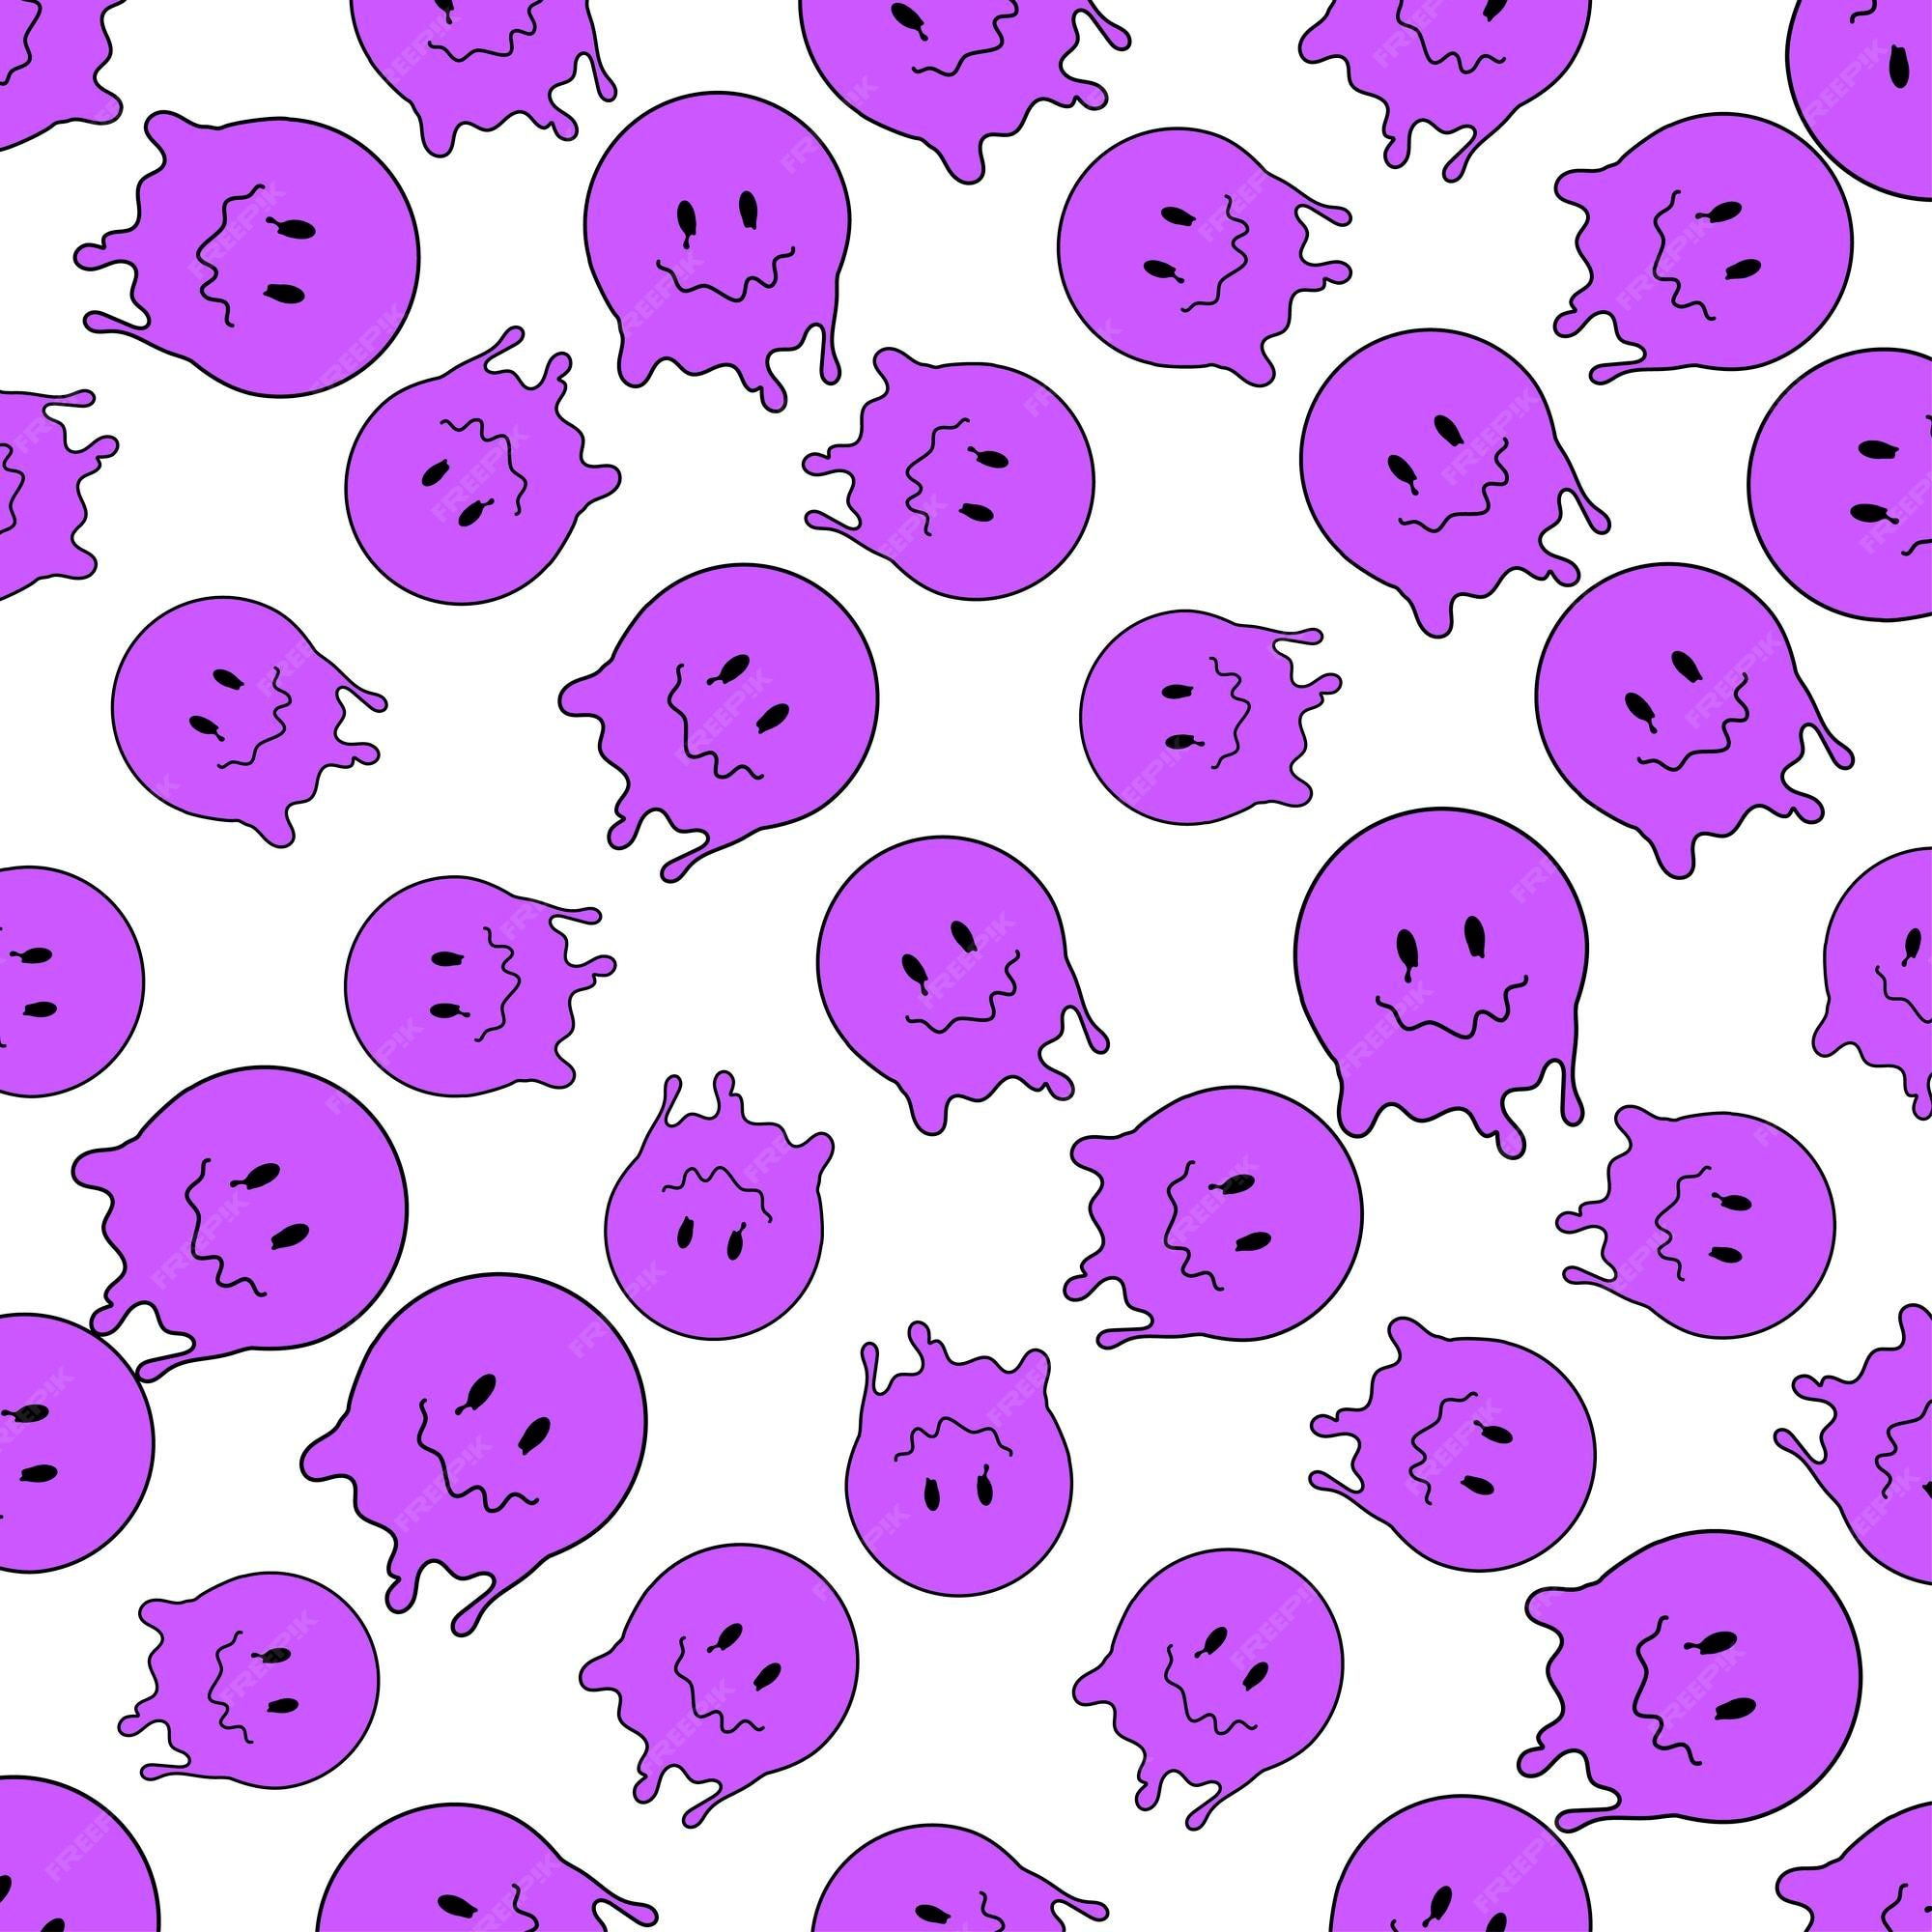  Smileys Hintergrundbild 2000x2000. Funny smile dope faces seamless pattern. psychedelic surreal techno melt smile background. Trippy faces, techno, melting smile face cartoon background wallpaper concept art. Y2K aesthetic at Vecteezy, y2k aesthetic